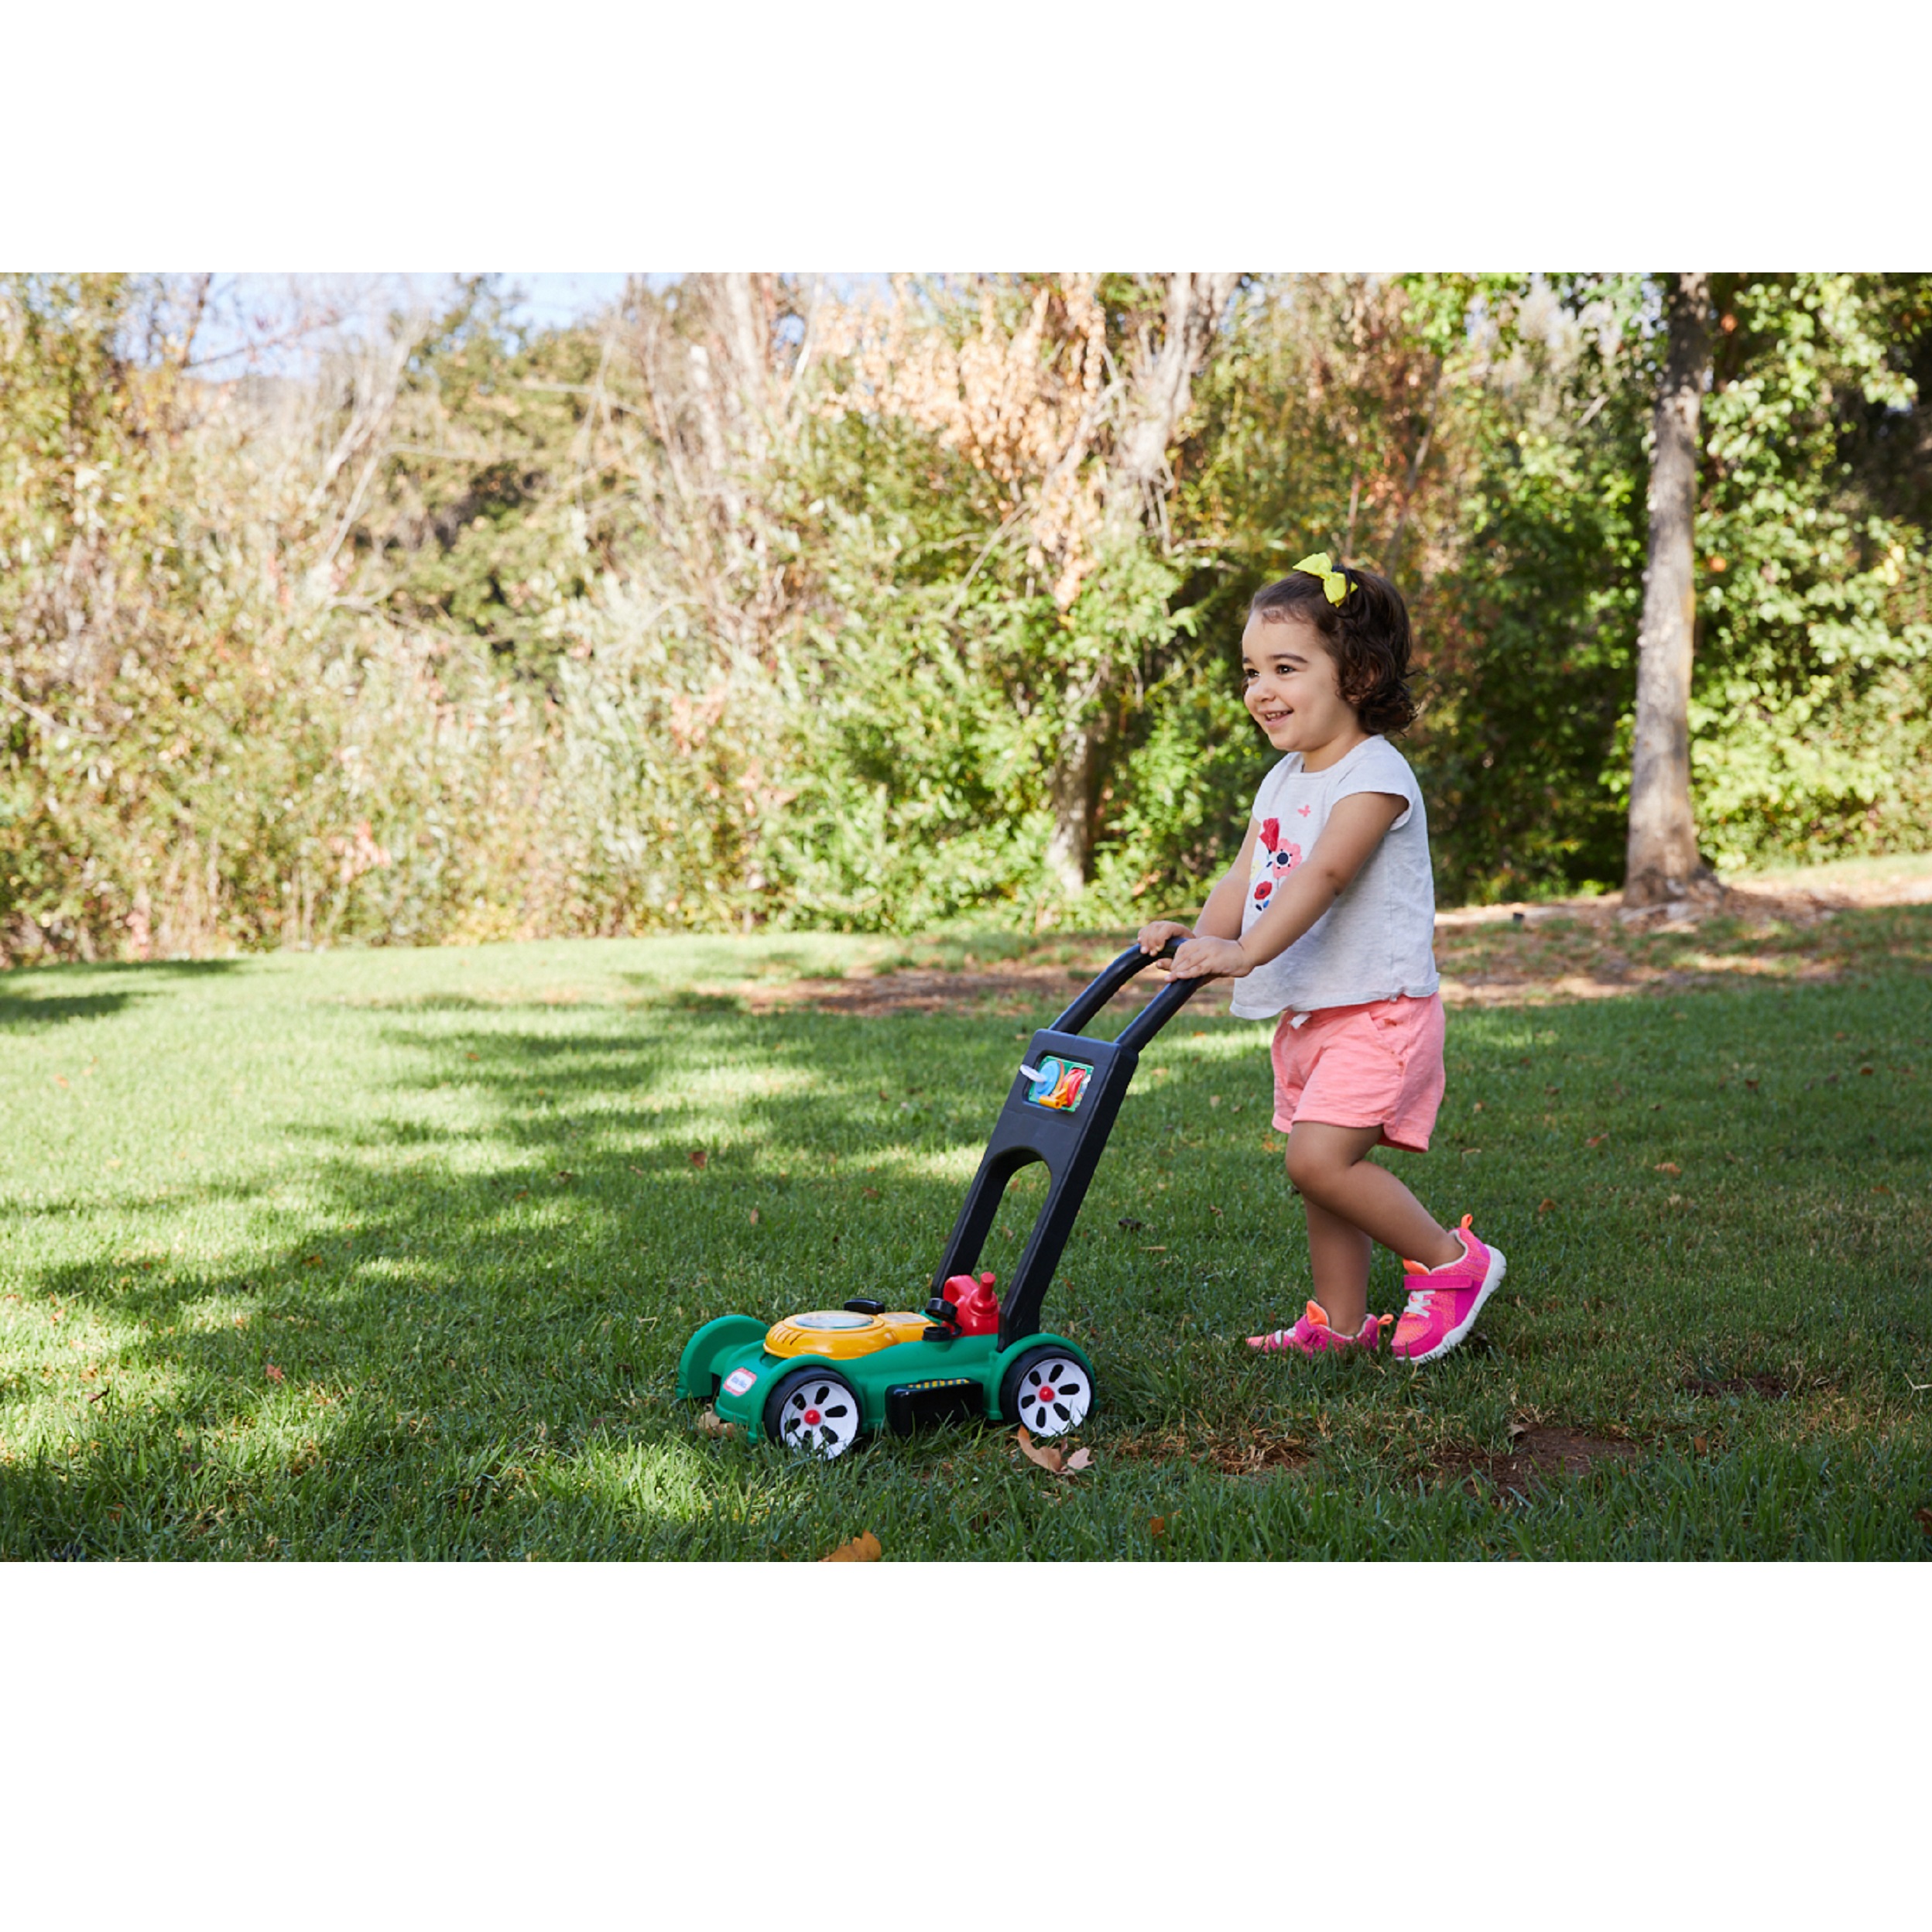 Little Tikes Gas N Go Mower Toddler Push Toy - For Kids Boys Girls Ages 1.5 Years and Older - image 4 of 7